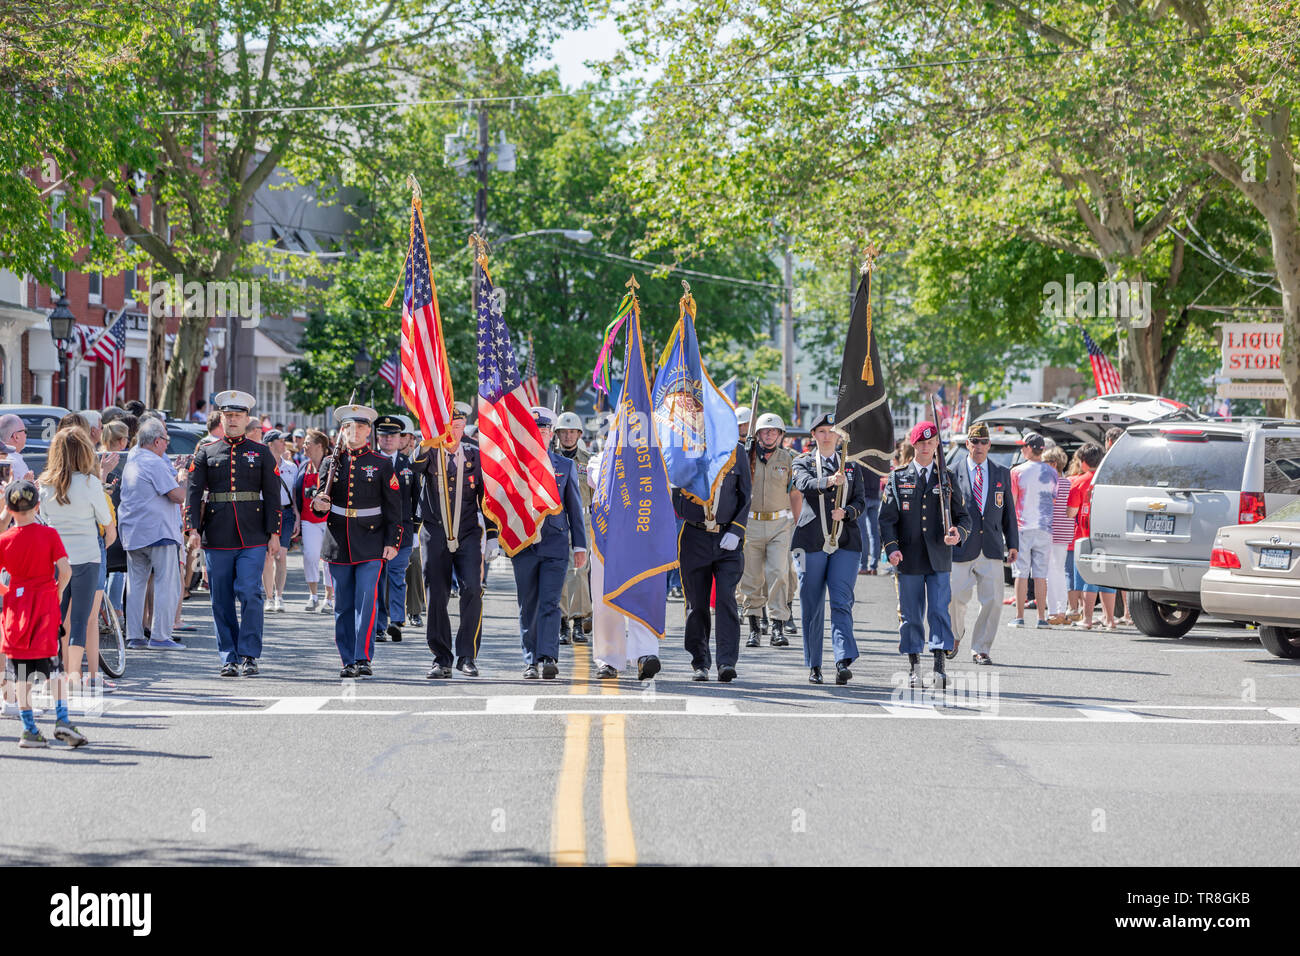 Soldiers marching in the Sag Harbor Memorial Day Parade in Sag Harbor, NY Stock Photo